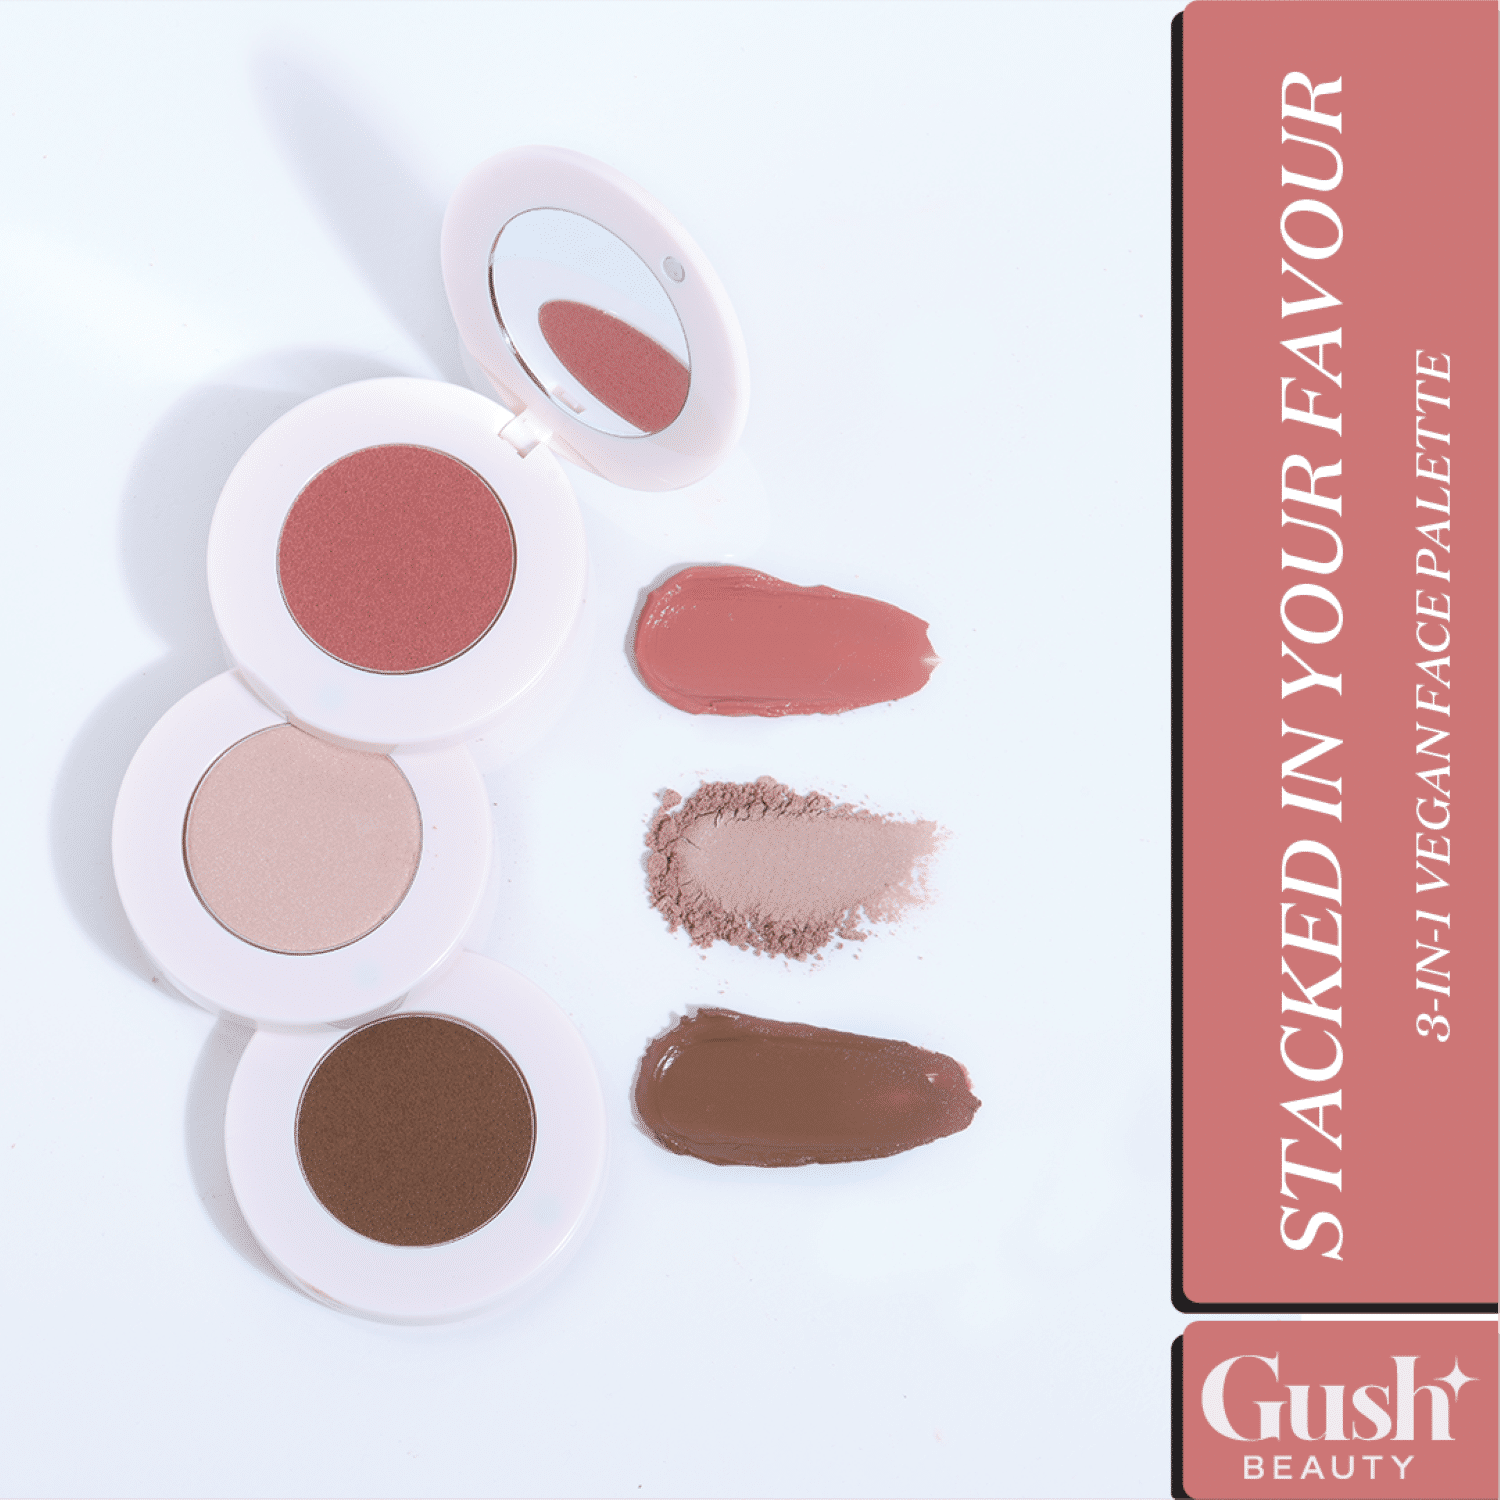 Gush Beauty Stacked In Your Favour Multi-purpose Face Palette - Weekdays To Weekend